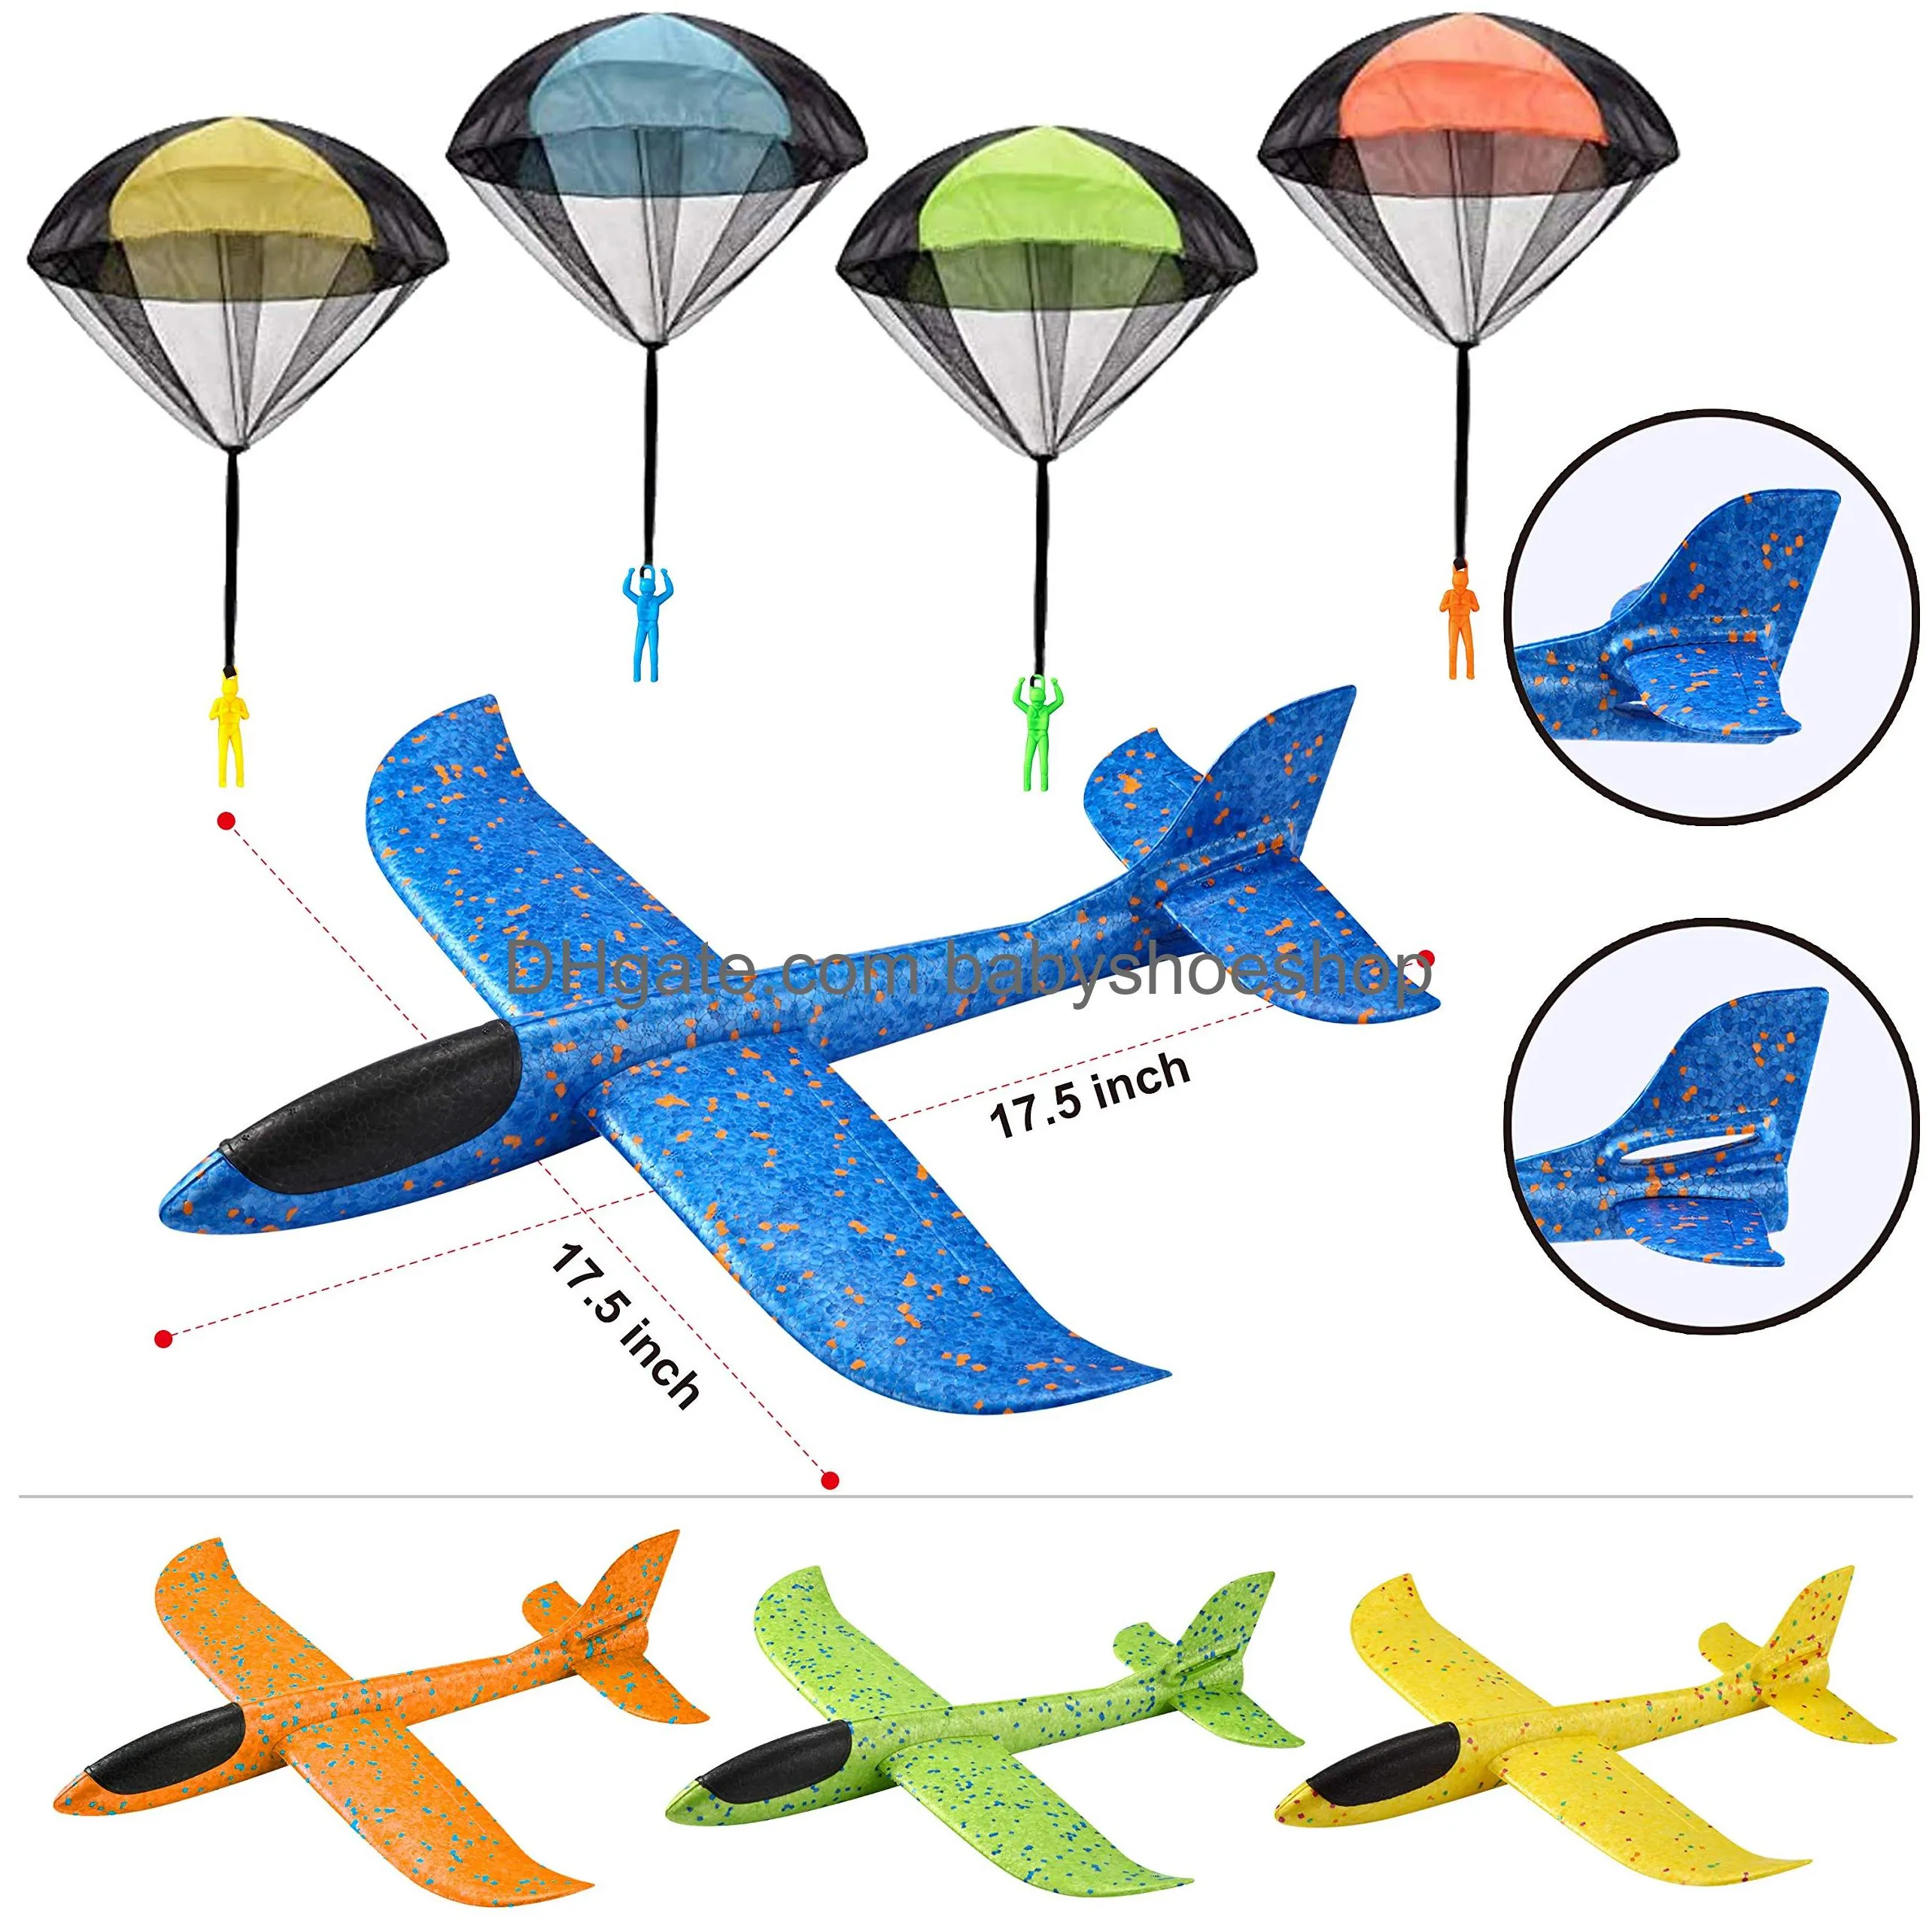 joyin 2 in 1 foam airplanes and parachute toy combo set 2 flight mode glider planes large throwing foam planes and parachutes flying toys for kids outdoor play kids backyard outdoor toys